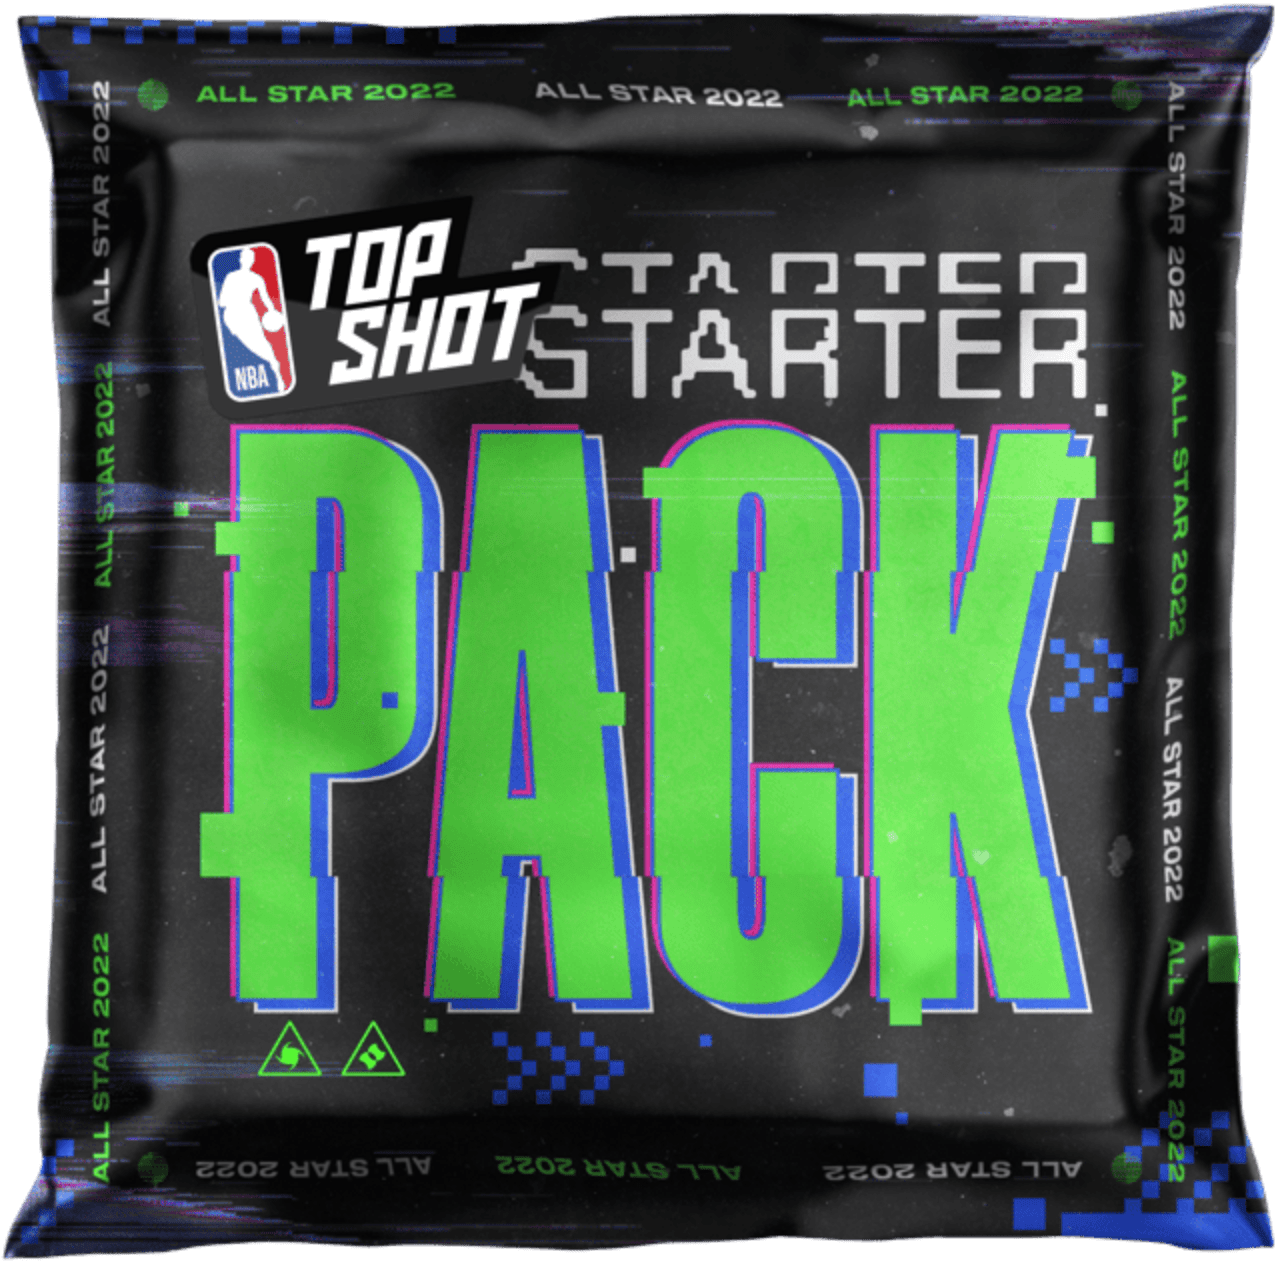 NBA Top Shot Starter Pack with basketball nft moments